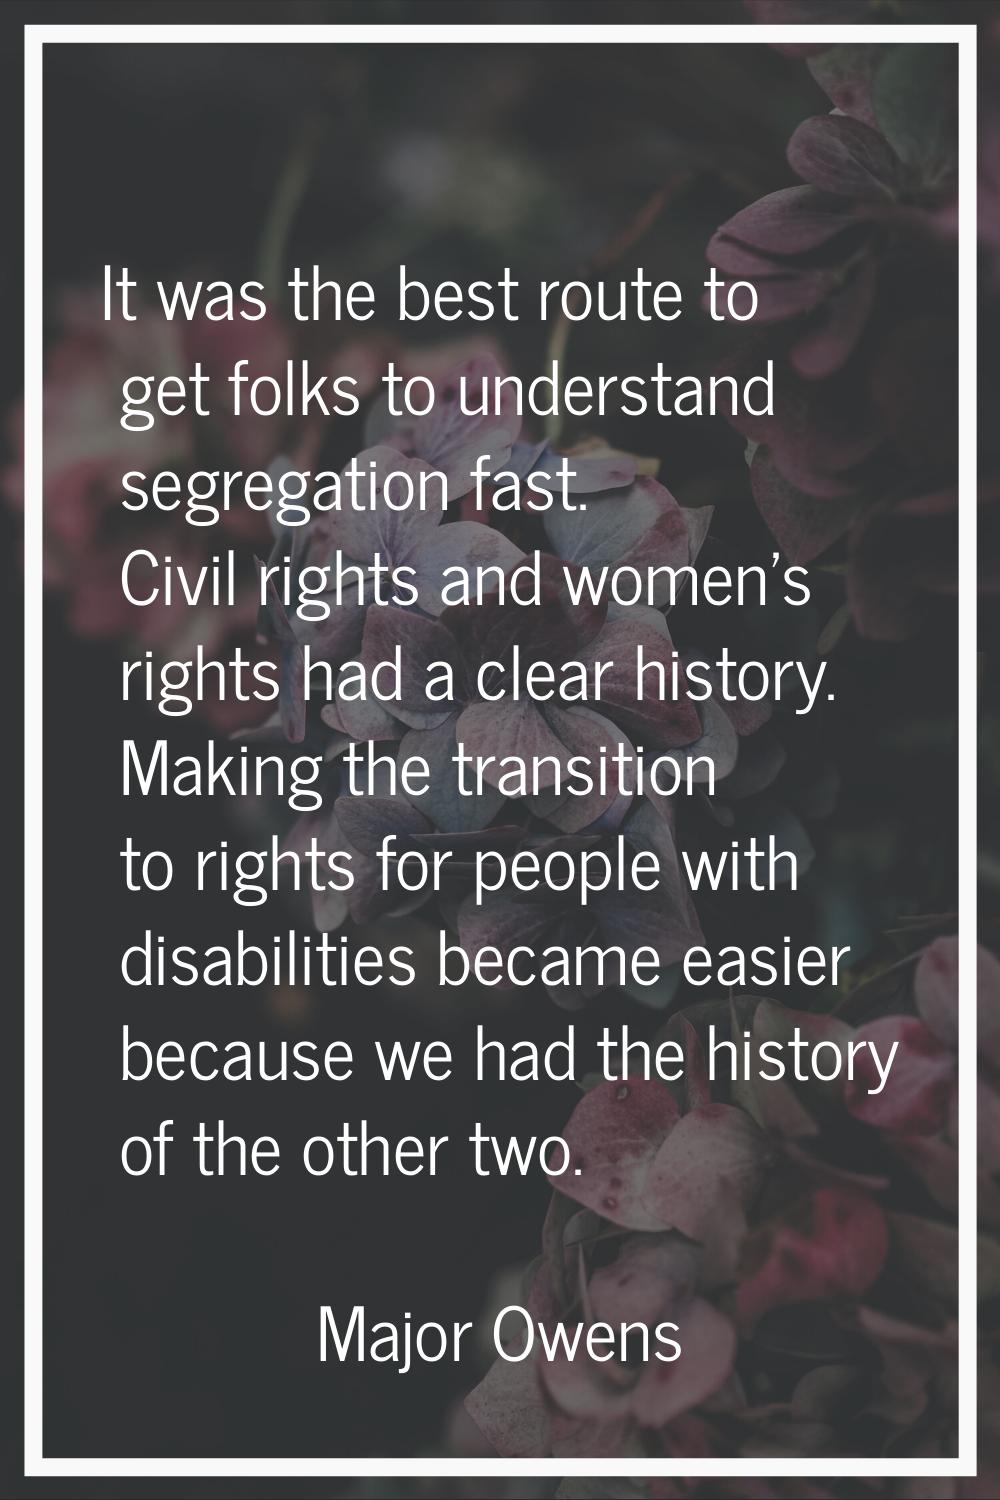 It was the best route to get folks to understand segregation fast. Civil rights and women's rights 